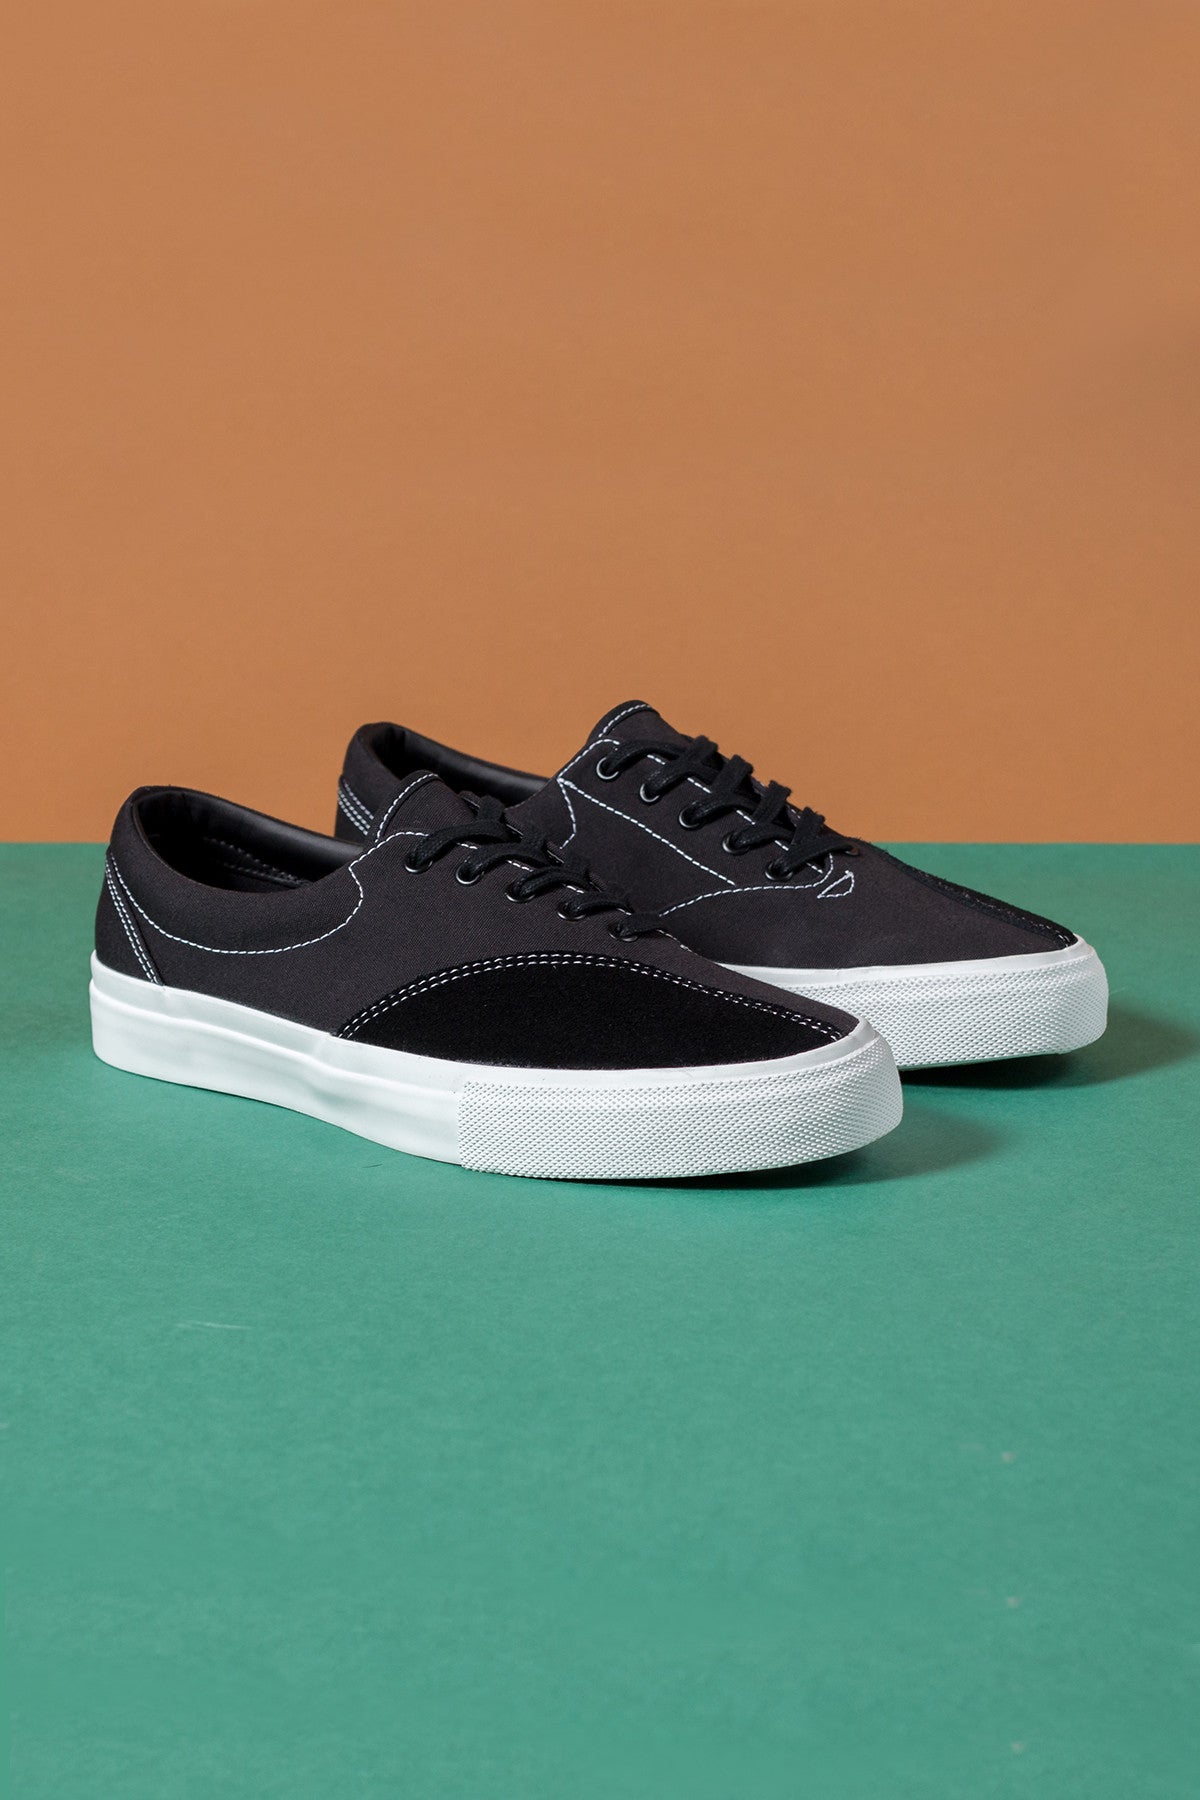 clearweather skate shoes